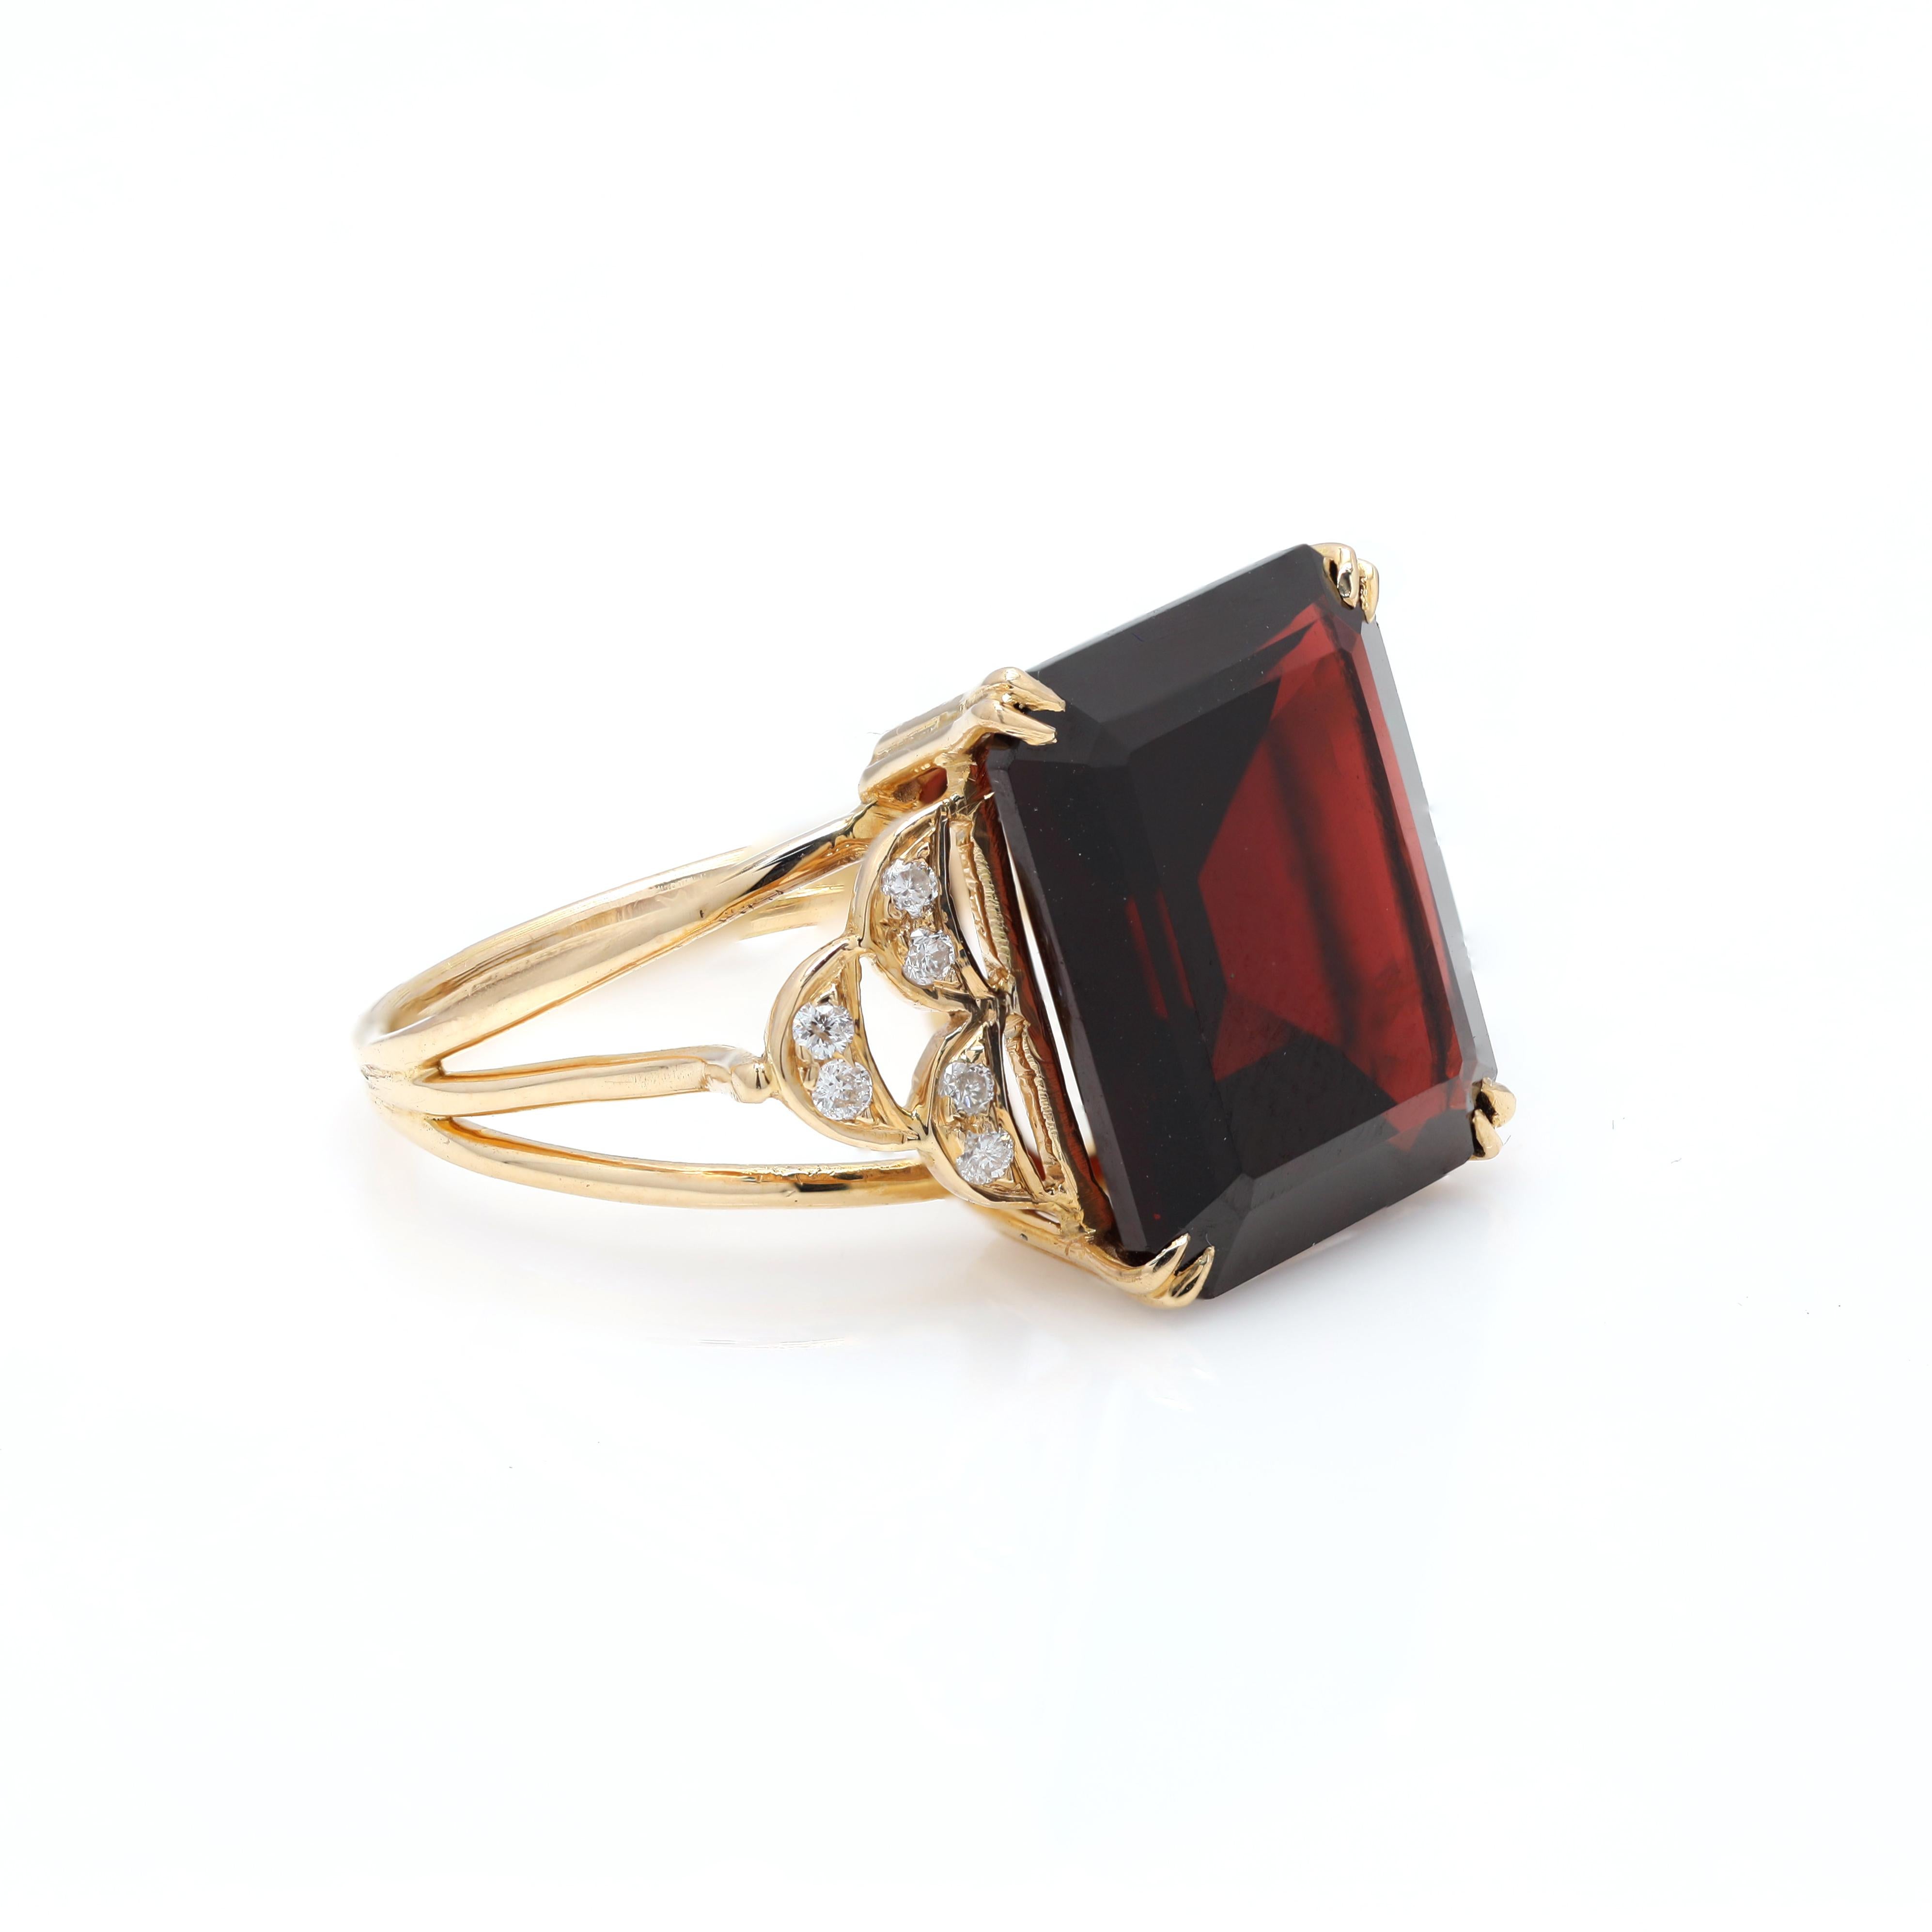 For Sale:  14k Solid Yellow Gold 10.7 Carat Deep Red Garnet Gemstone Ring with Diamonds 2